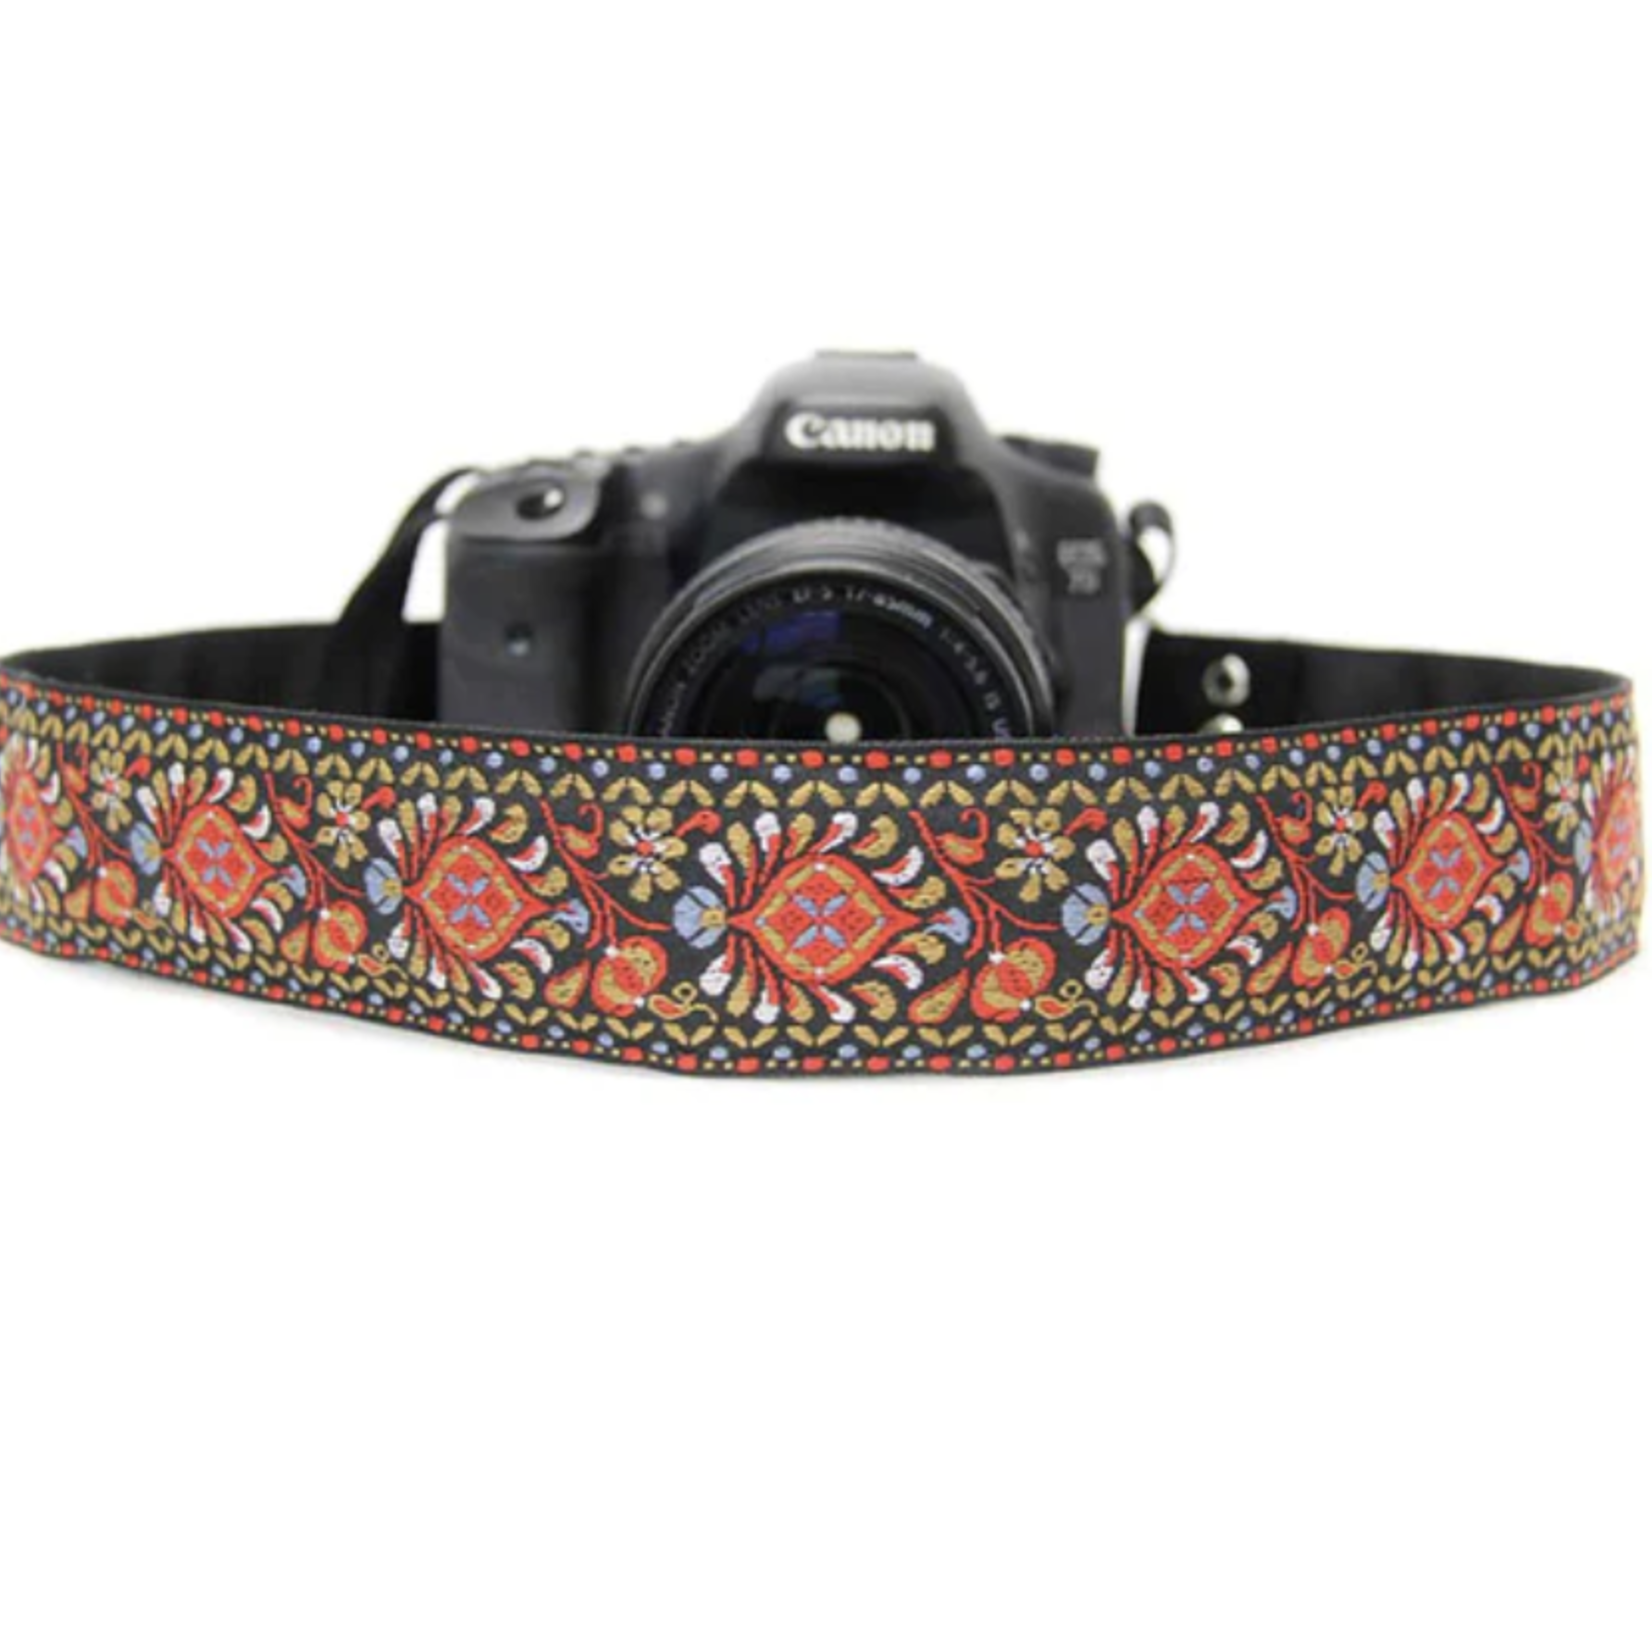 Capturing Couture Capturing Couture Vintage Camera Strap - Harmony 2"